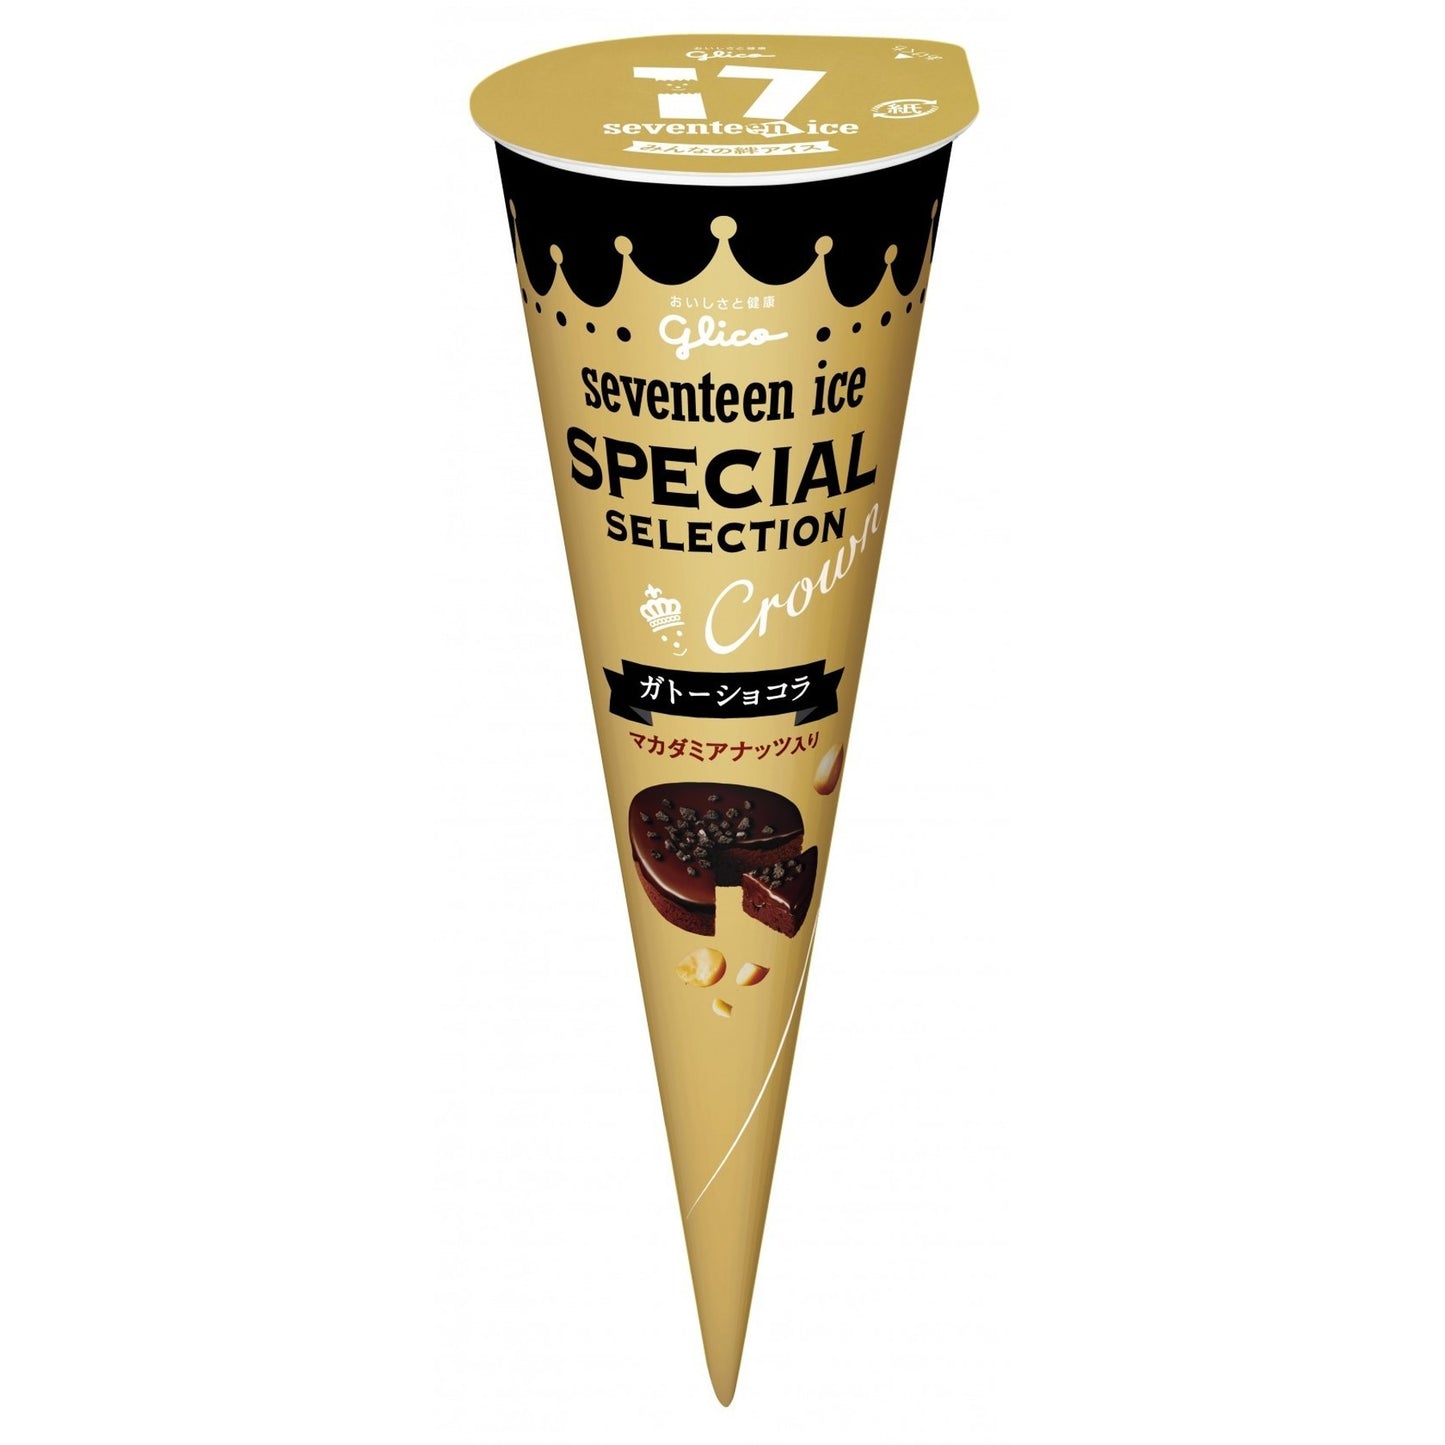 [Glico][Seventeen Ice Special Selection Gateau Chocolate with Macadamia Nuts]